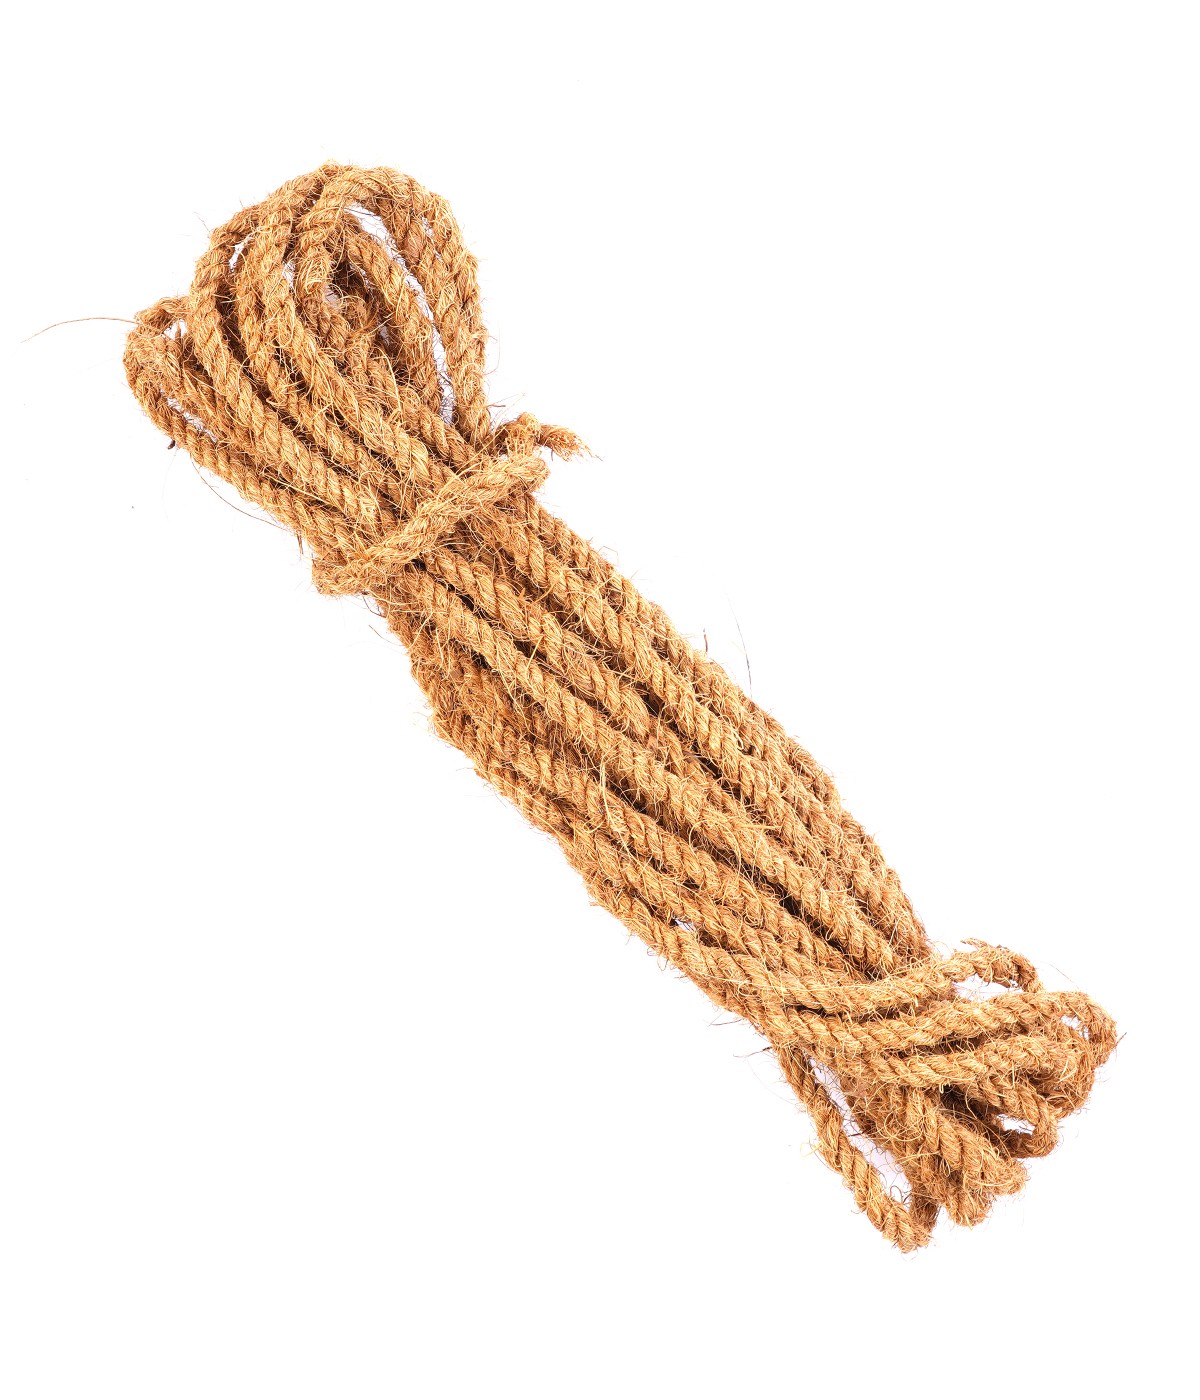 Premium Quality Coir Rope - Natural, Durable Twine for Crafts